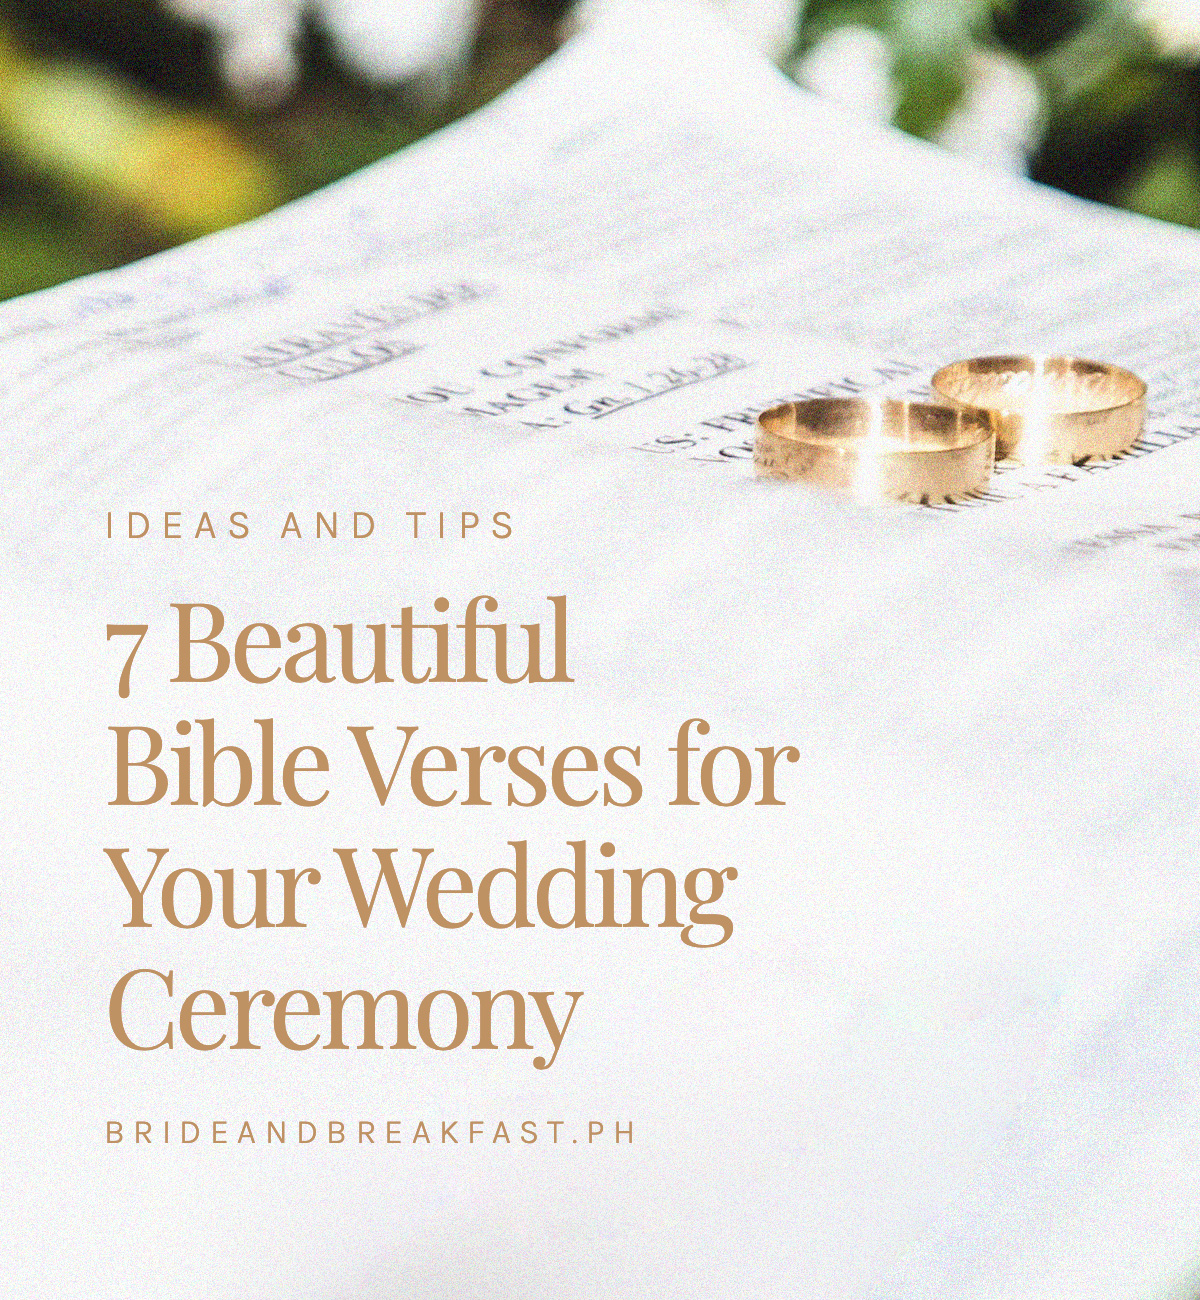 7 Beautiful Bible Verses for Your Wedding Ceremony